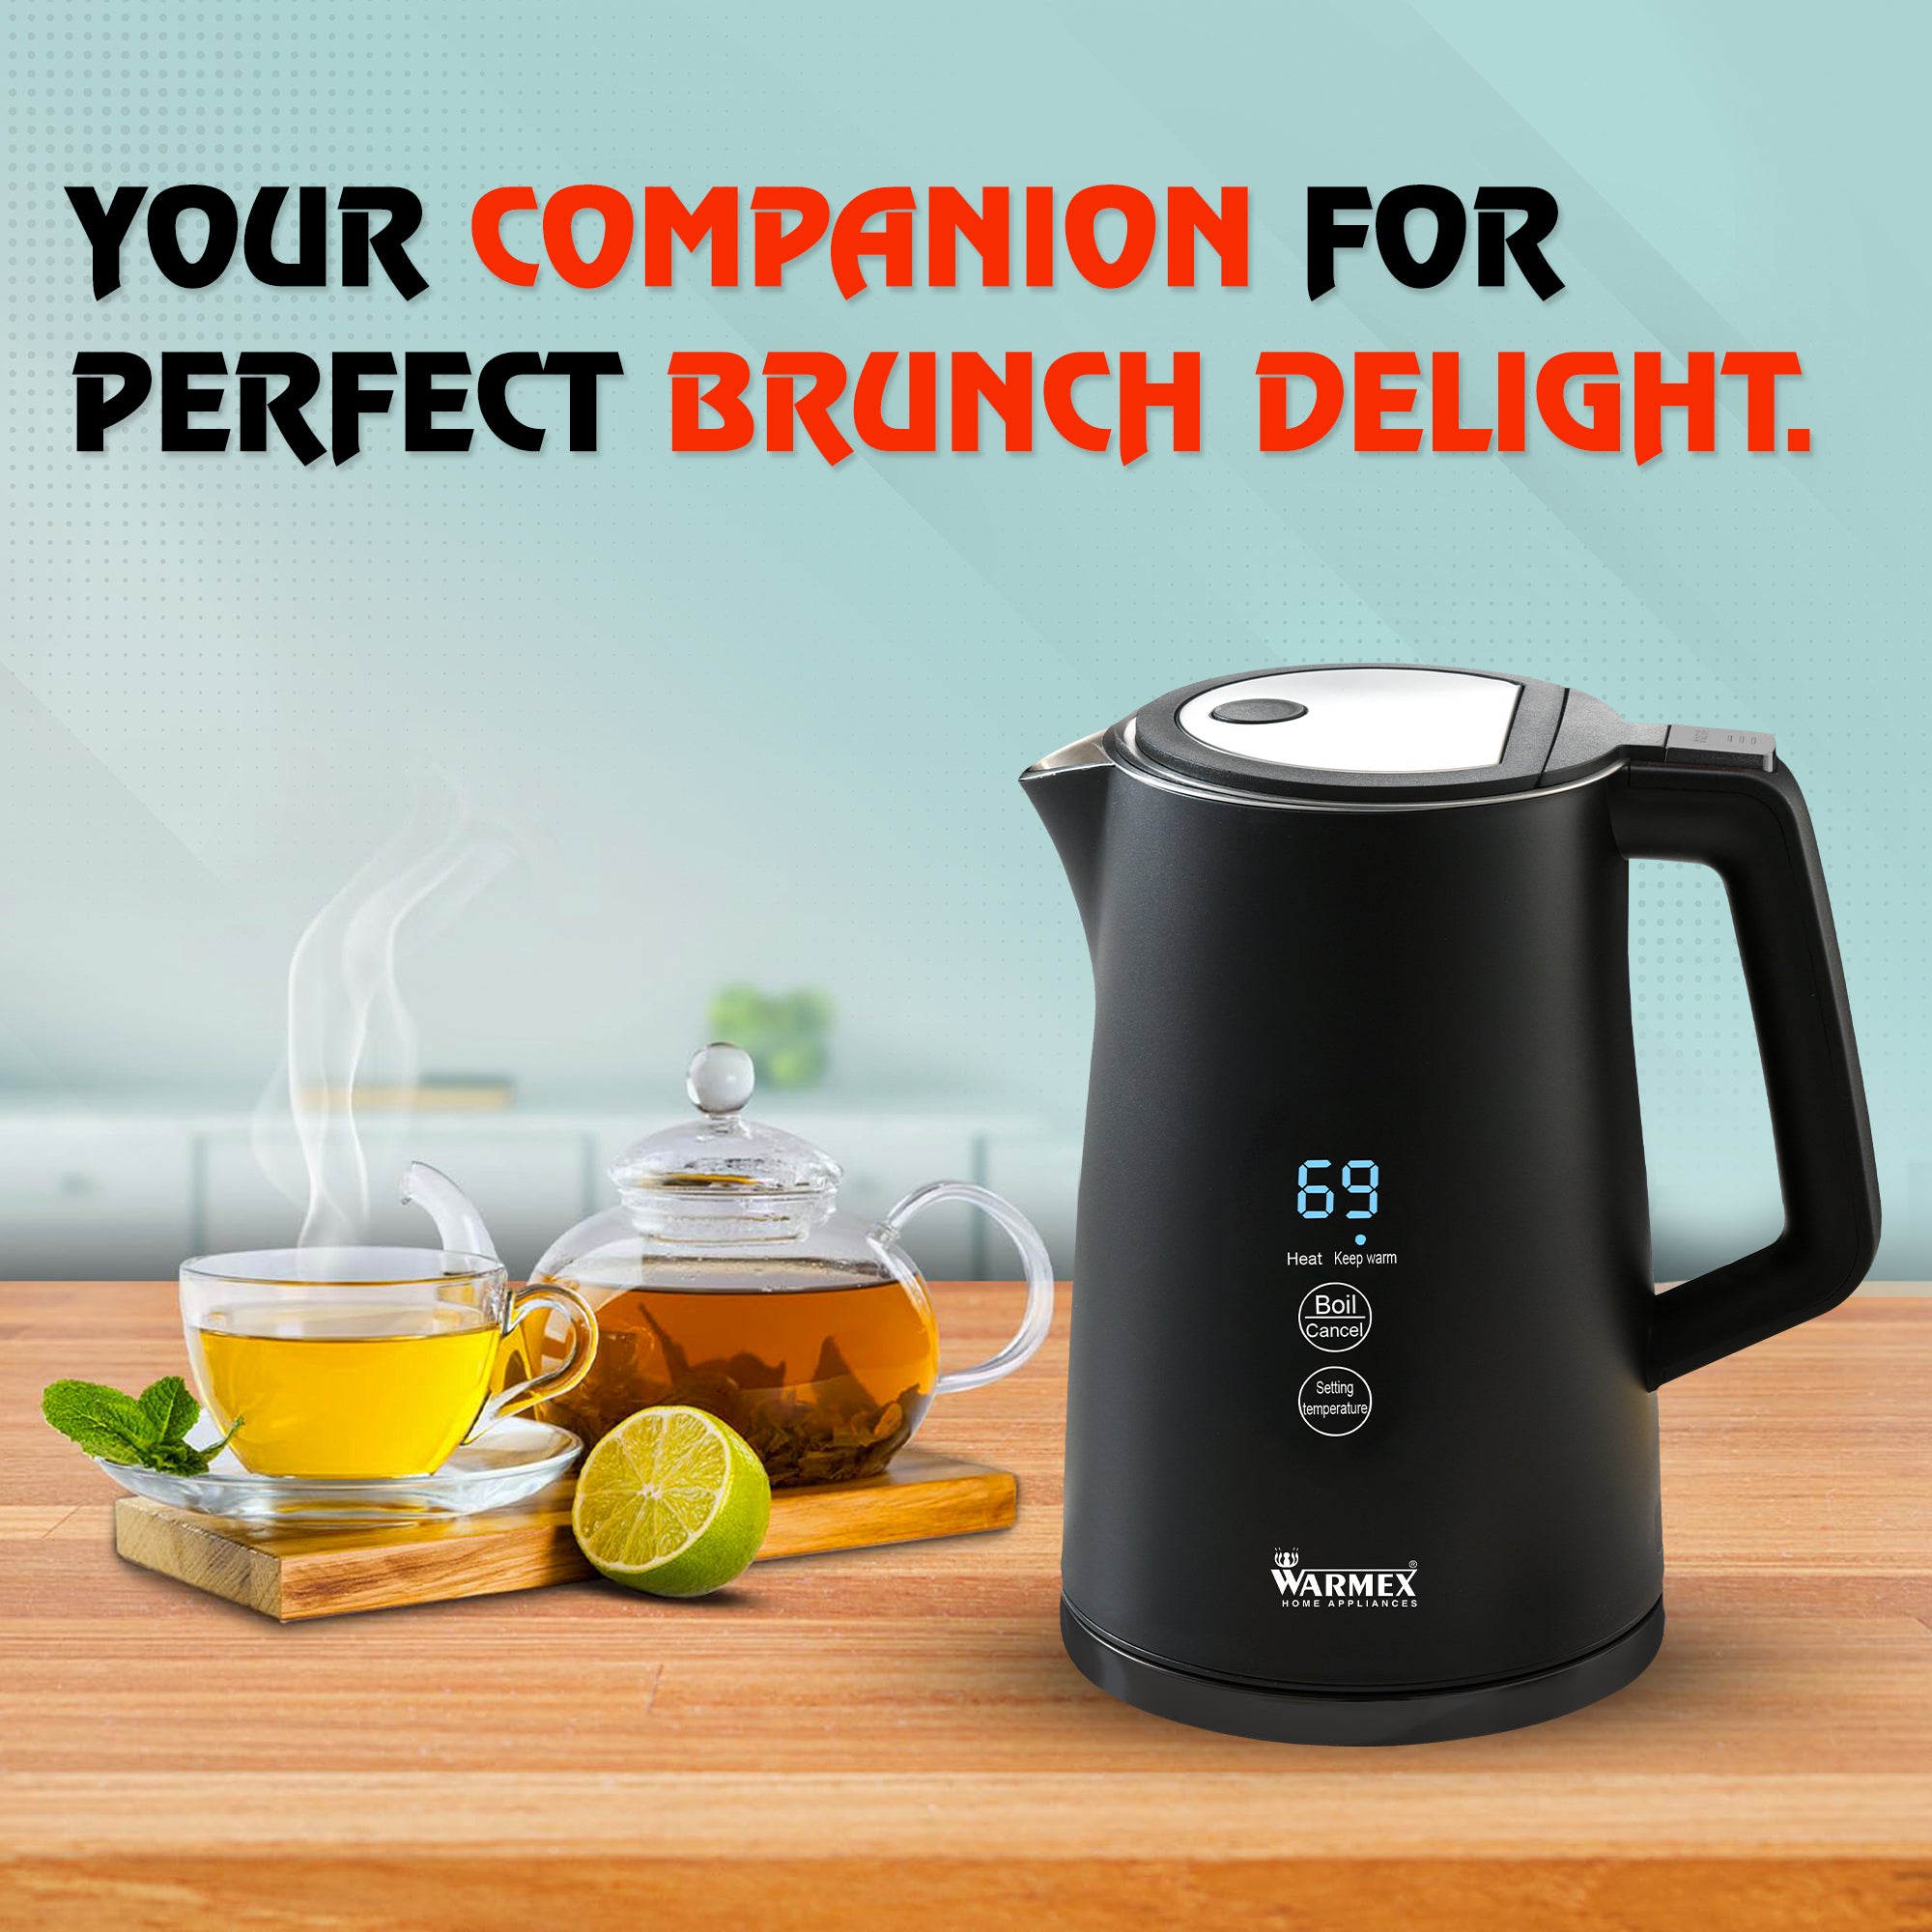 Warmex Premium Electric Kettle | 1.7 Ltr Double Wall | Cool touch feature | Touch Sensitive Panel | 1500 Watts | Digital Display | Auto shut-off (Black) warmexhomeappliances